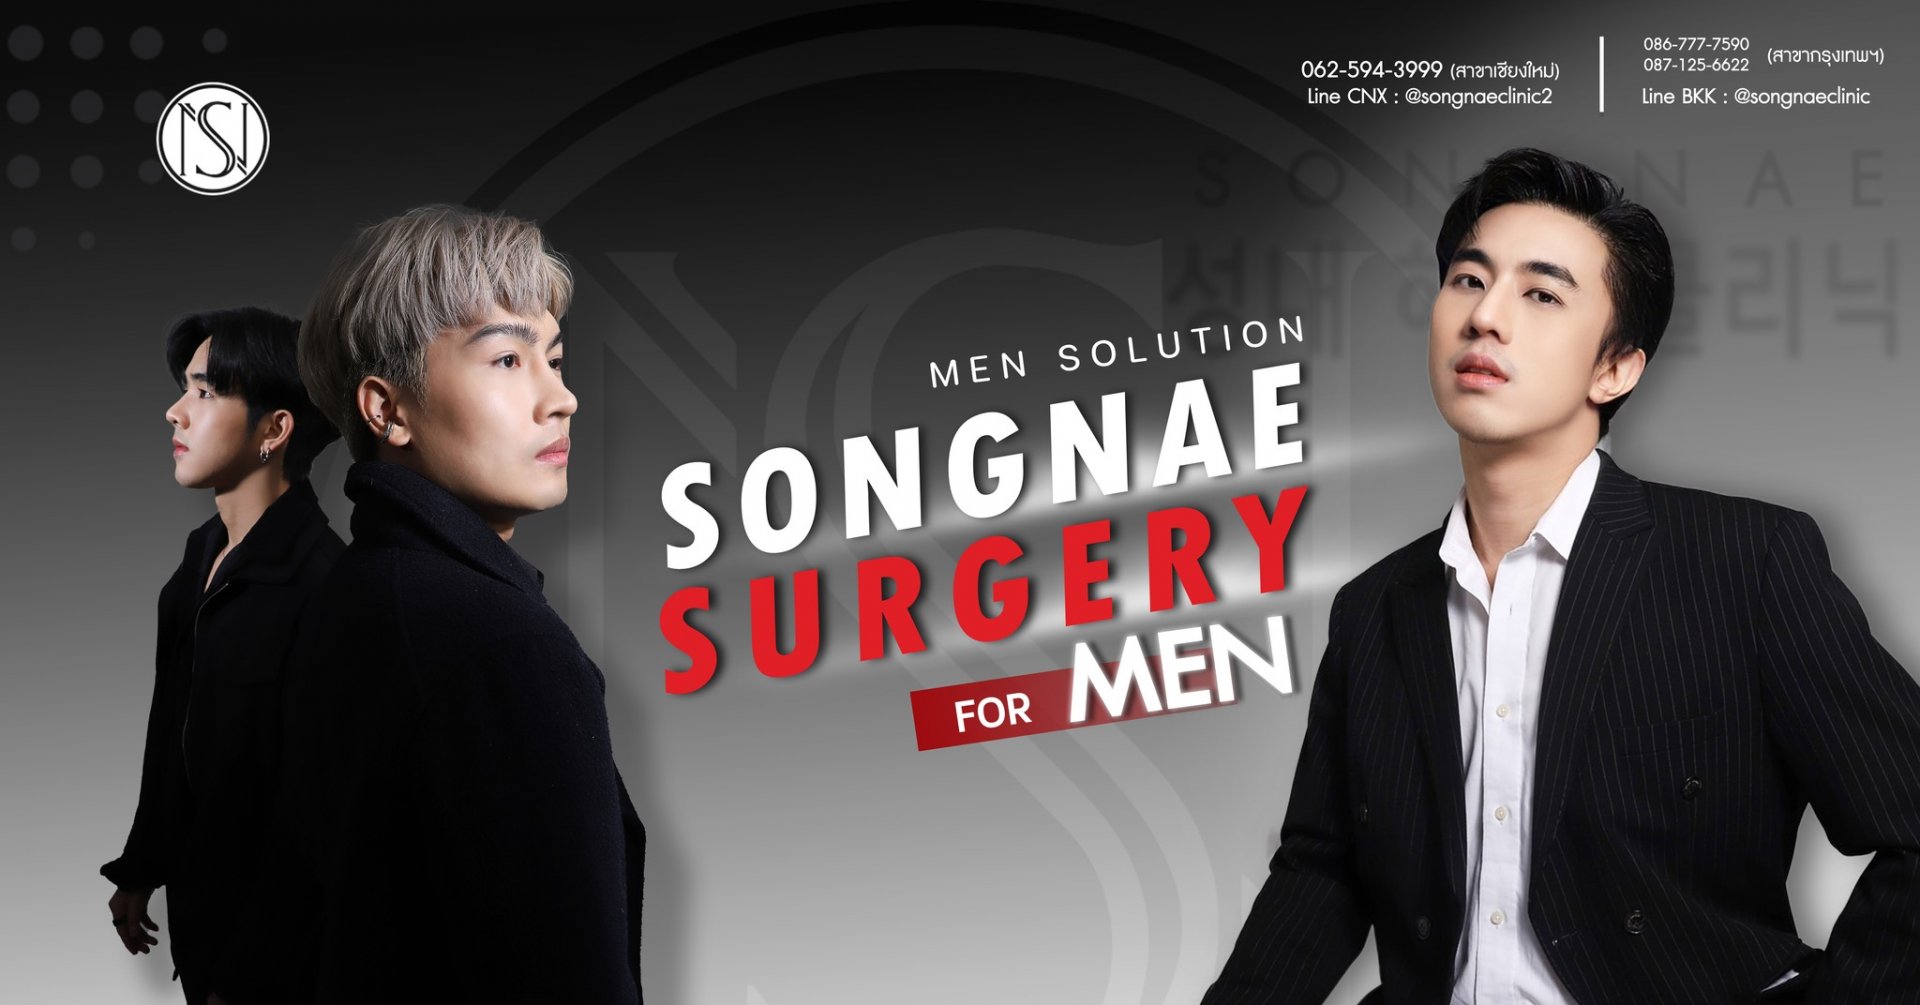 Songnae Surgery for Men